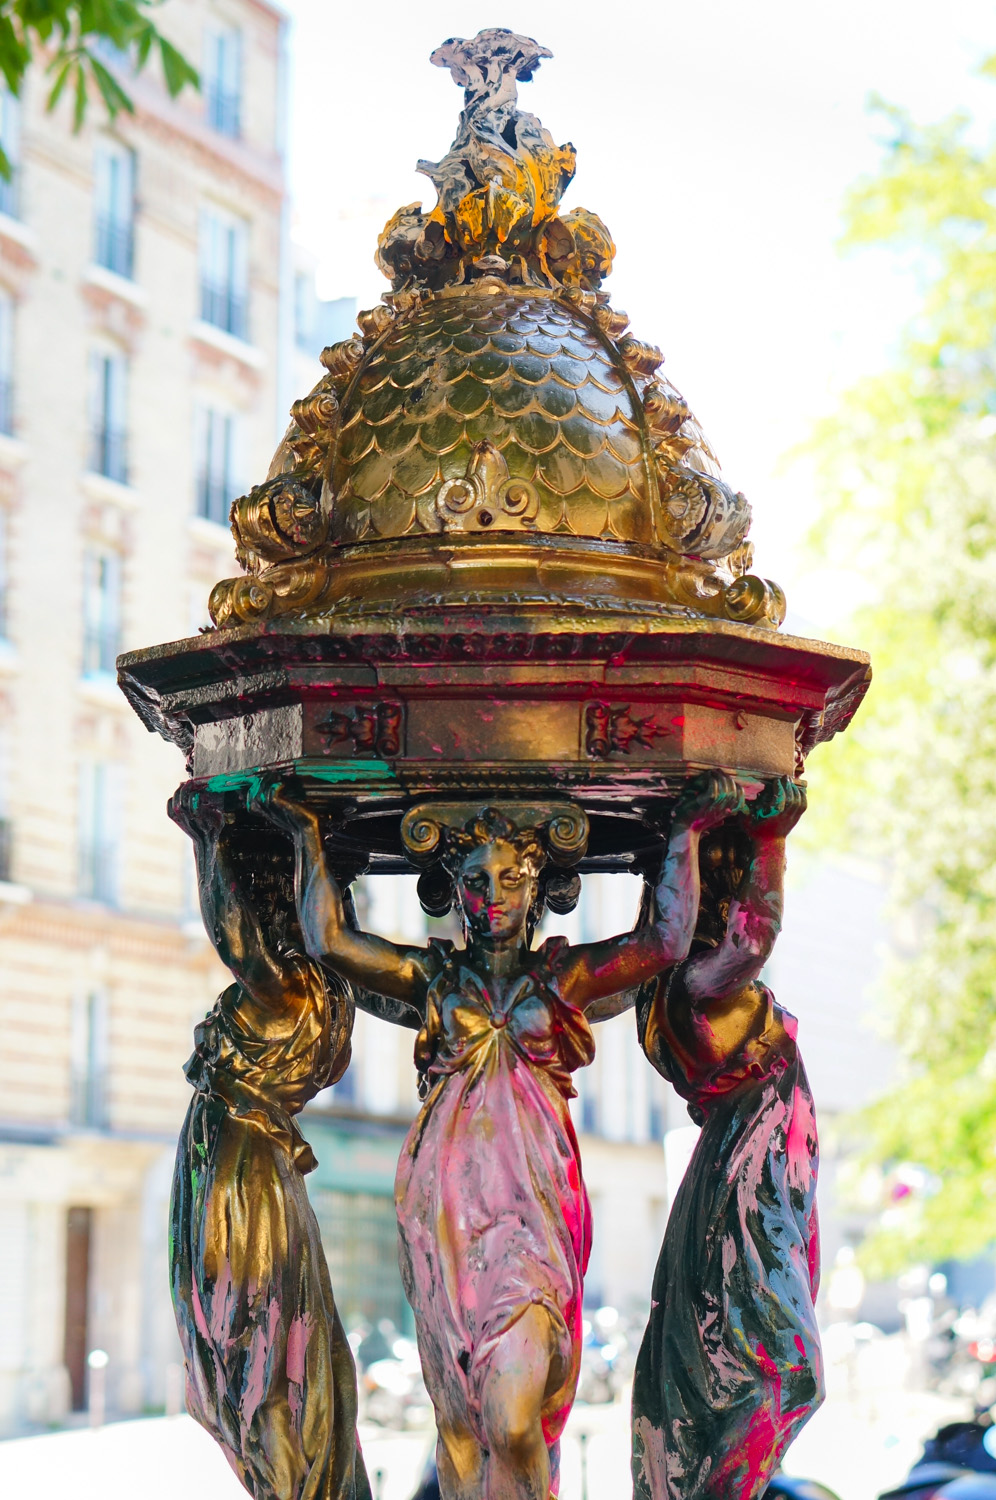 fontaine wallace customisée, fontaine wallace décorée, fontaine wallace rose, fontaine wallace dorée, fontaine wallace paris